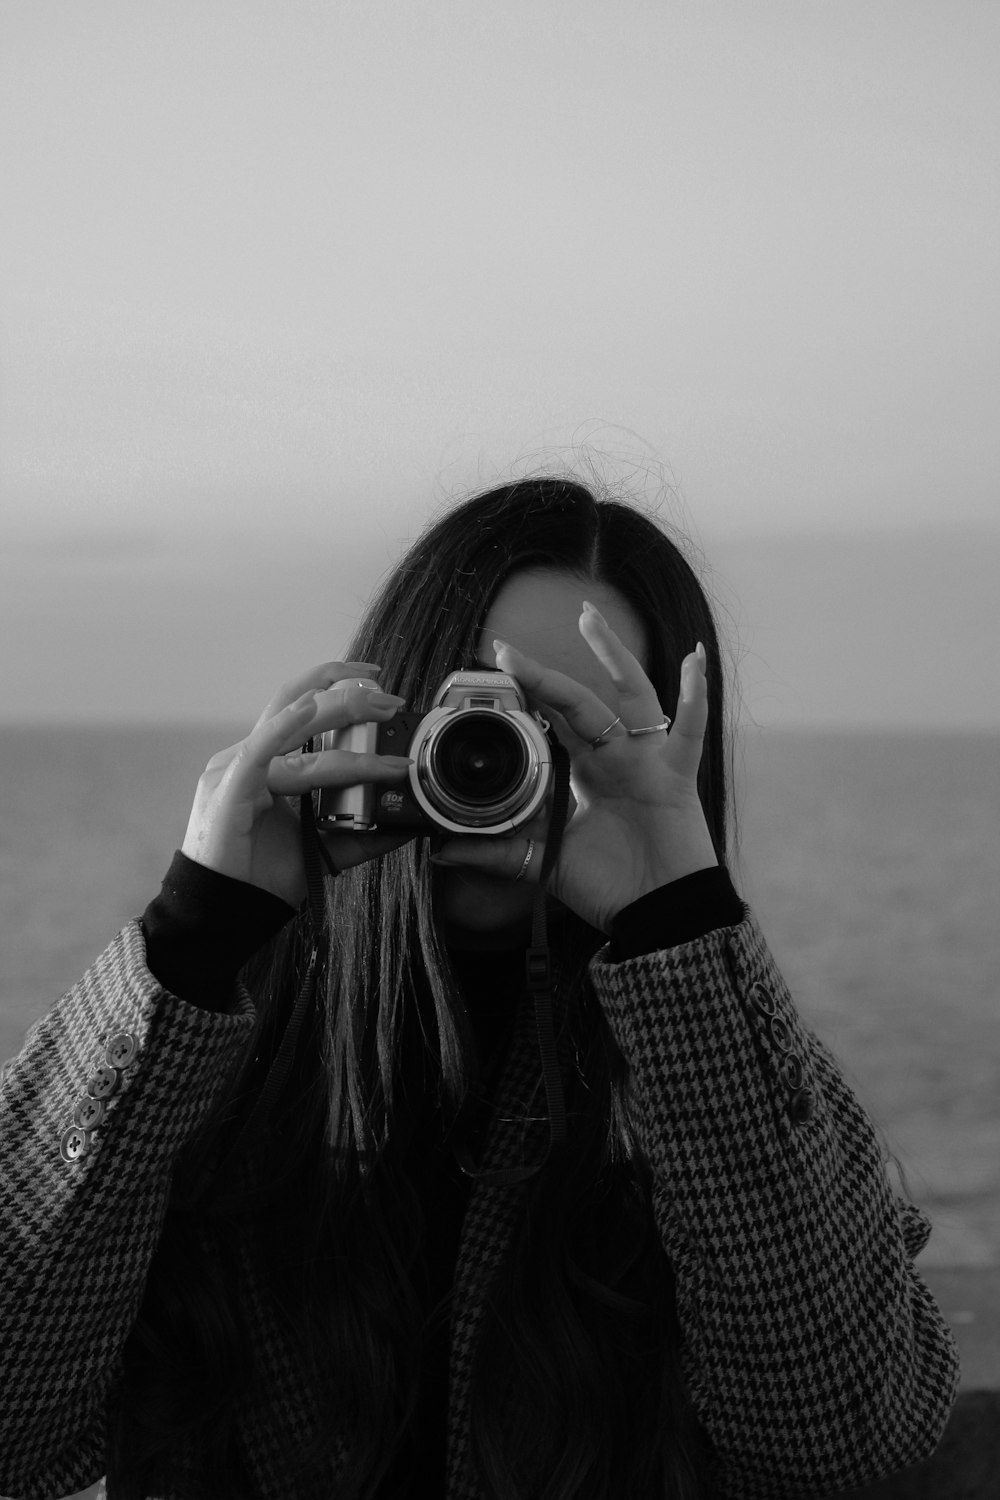 a woman taking a picture of the ocean with a camera